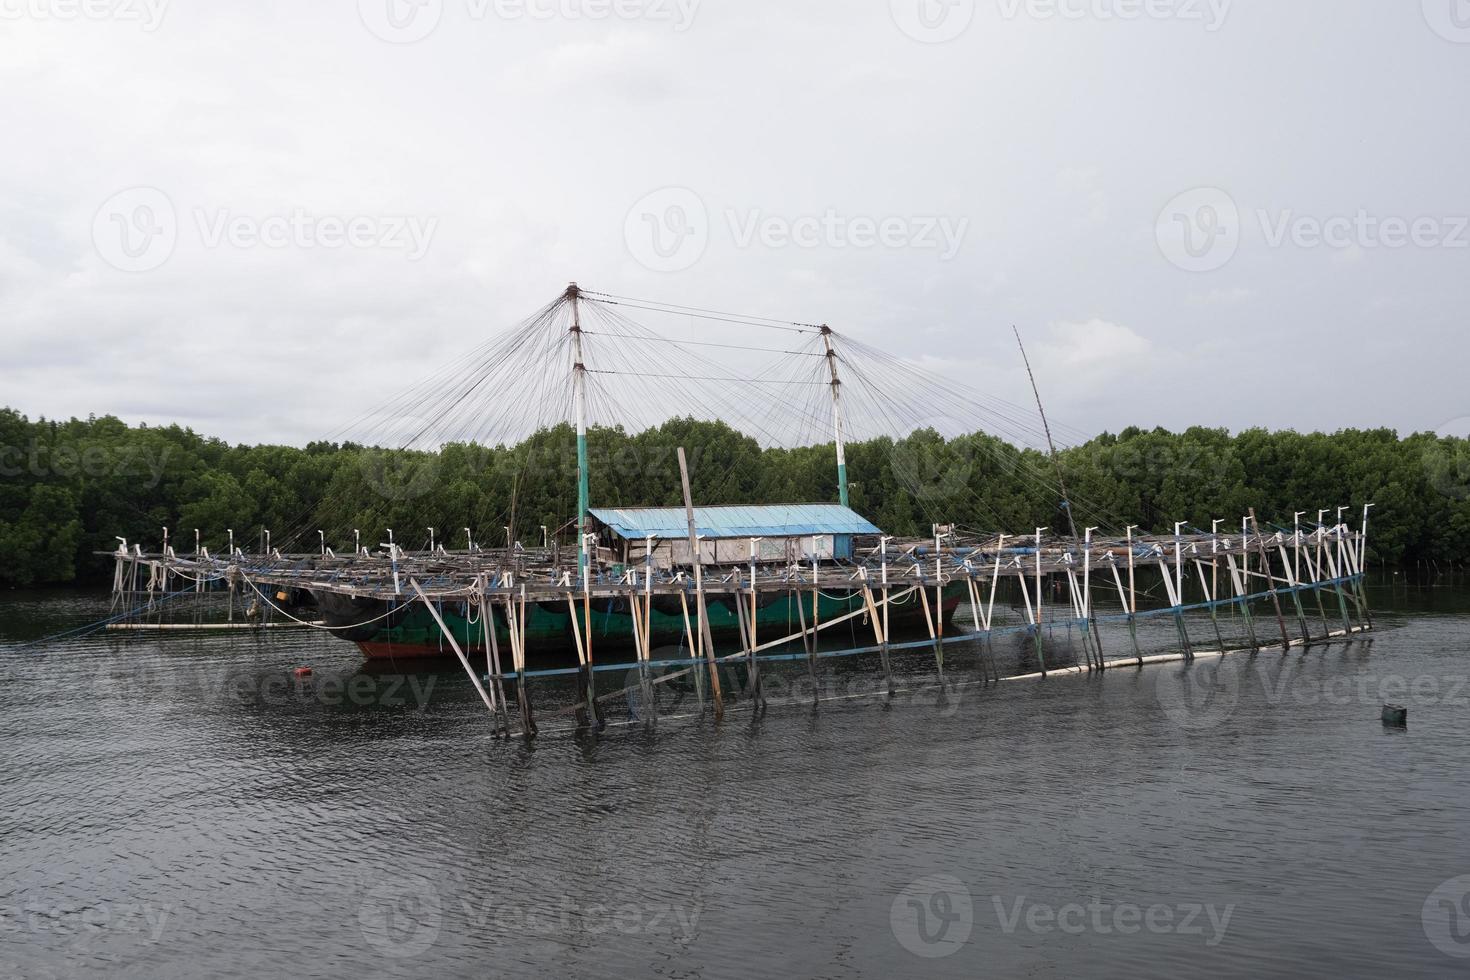 https://static.vecteezy.com/system/resources/previews/014/378/710/non_2x/bagan-or-bagang-is-a-tool-for-catching-fish-shrimp-squid-types-of-fishing-vessels-in-indonesia-photo.jpg